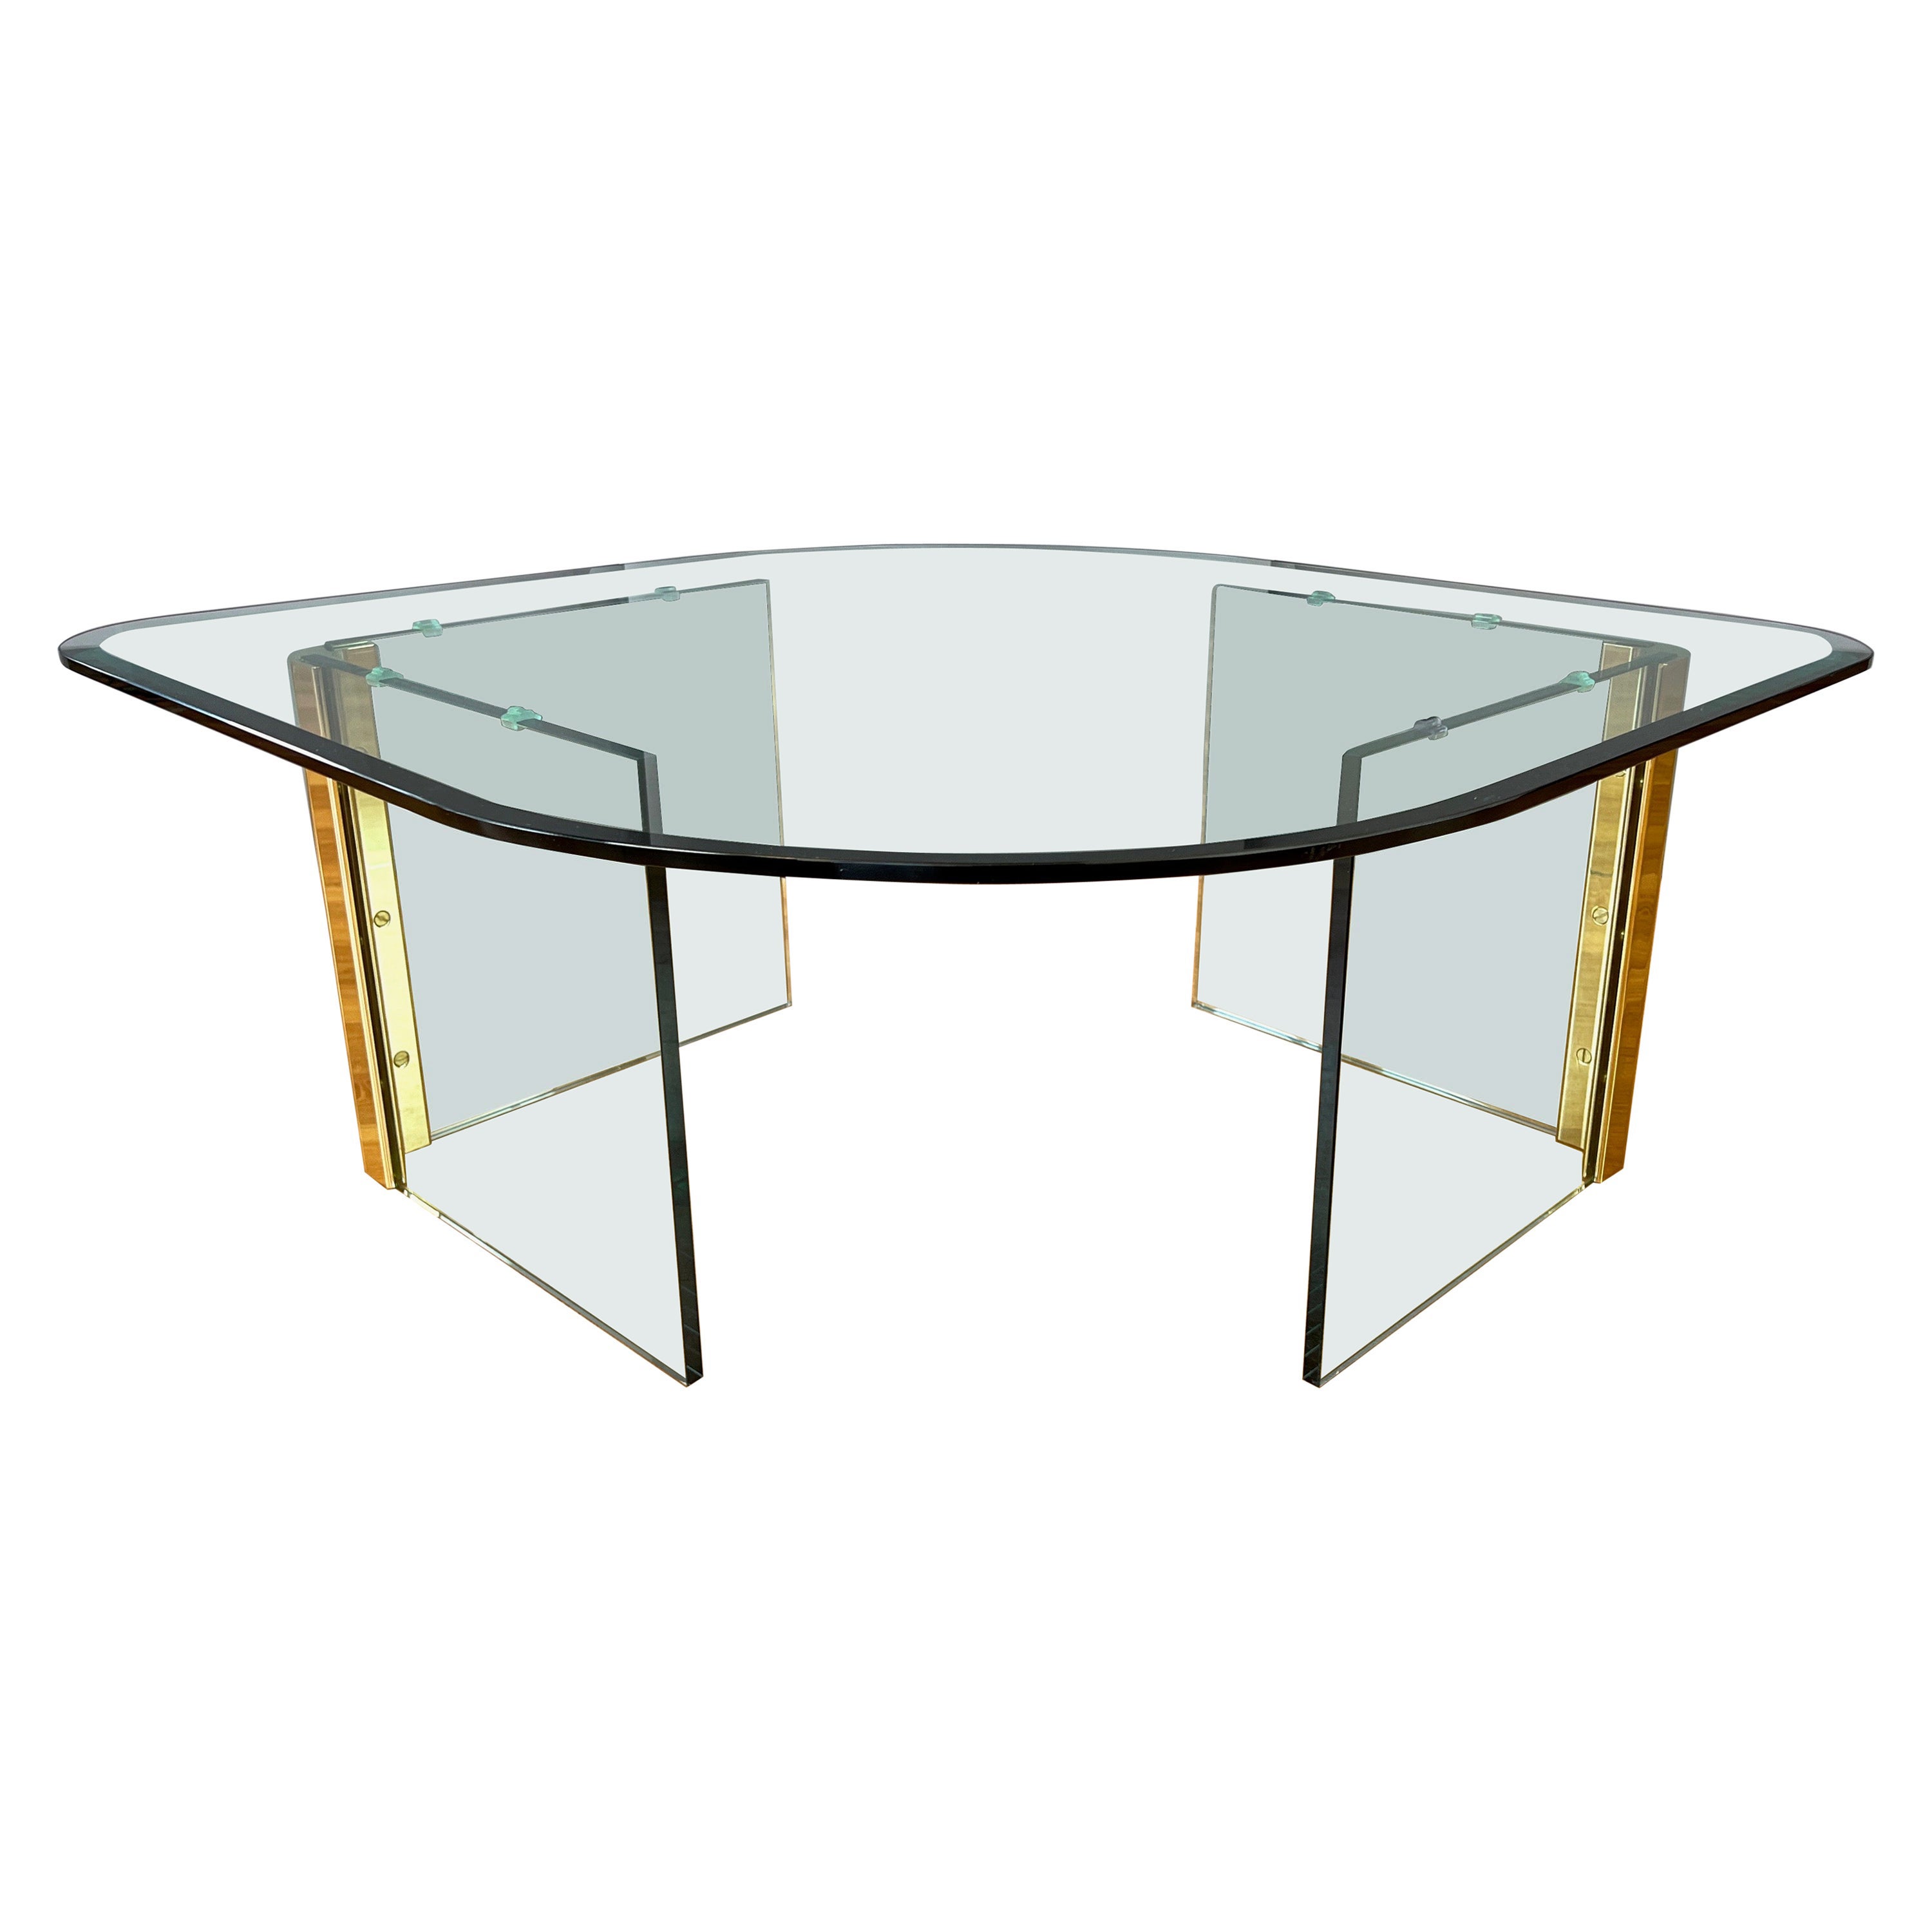 Leon Rosen for The Pace Collection Brass and Glass Coffee Table, 1970s